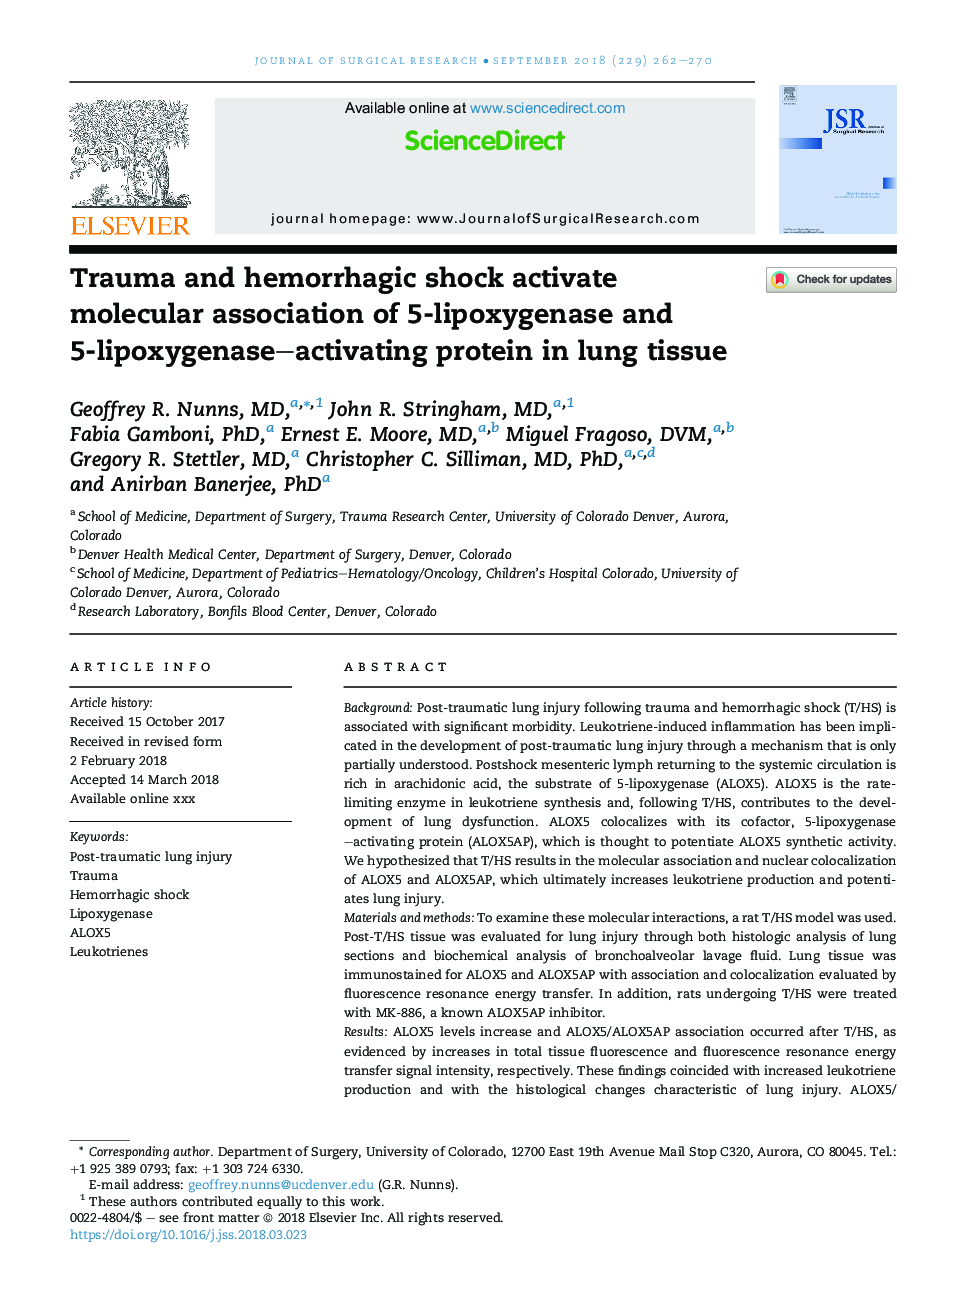 Trauma and hemorrhagic shock activate molecular association of 5-lipoxygenase and 5-lipoxygenase-Activating protein in lung tissue